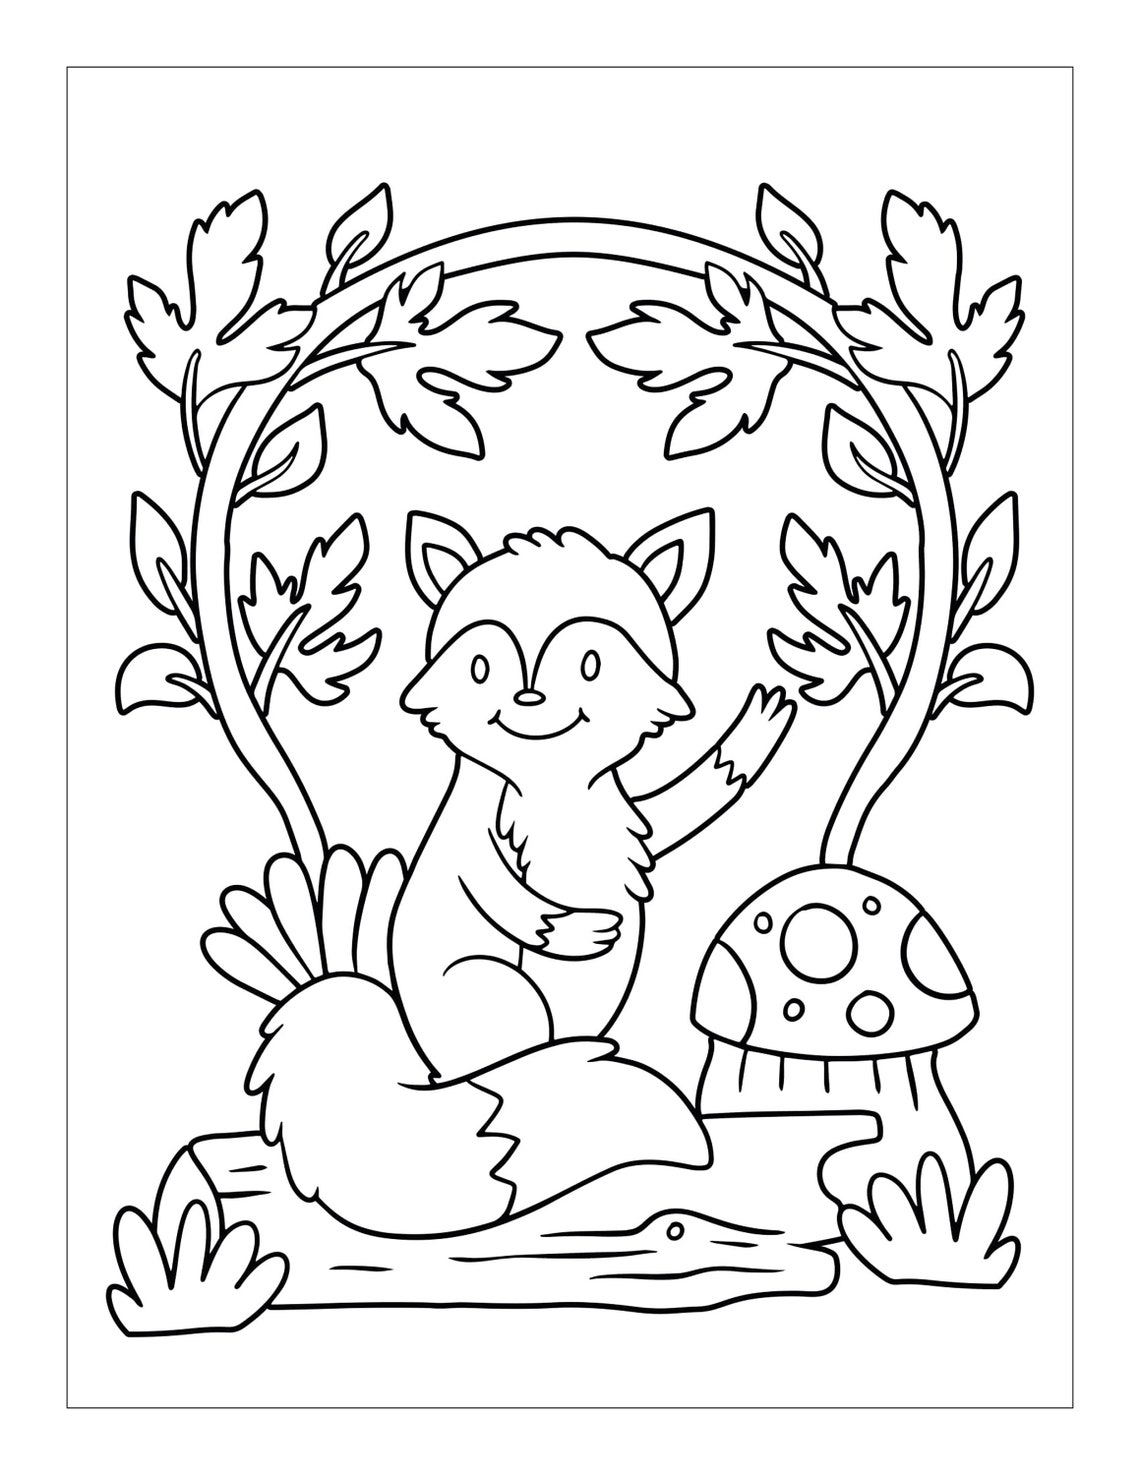 Cute Woodland animal colouring pages Cute Woodland animal | Etsy